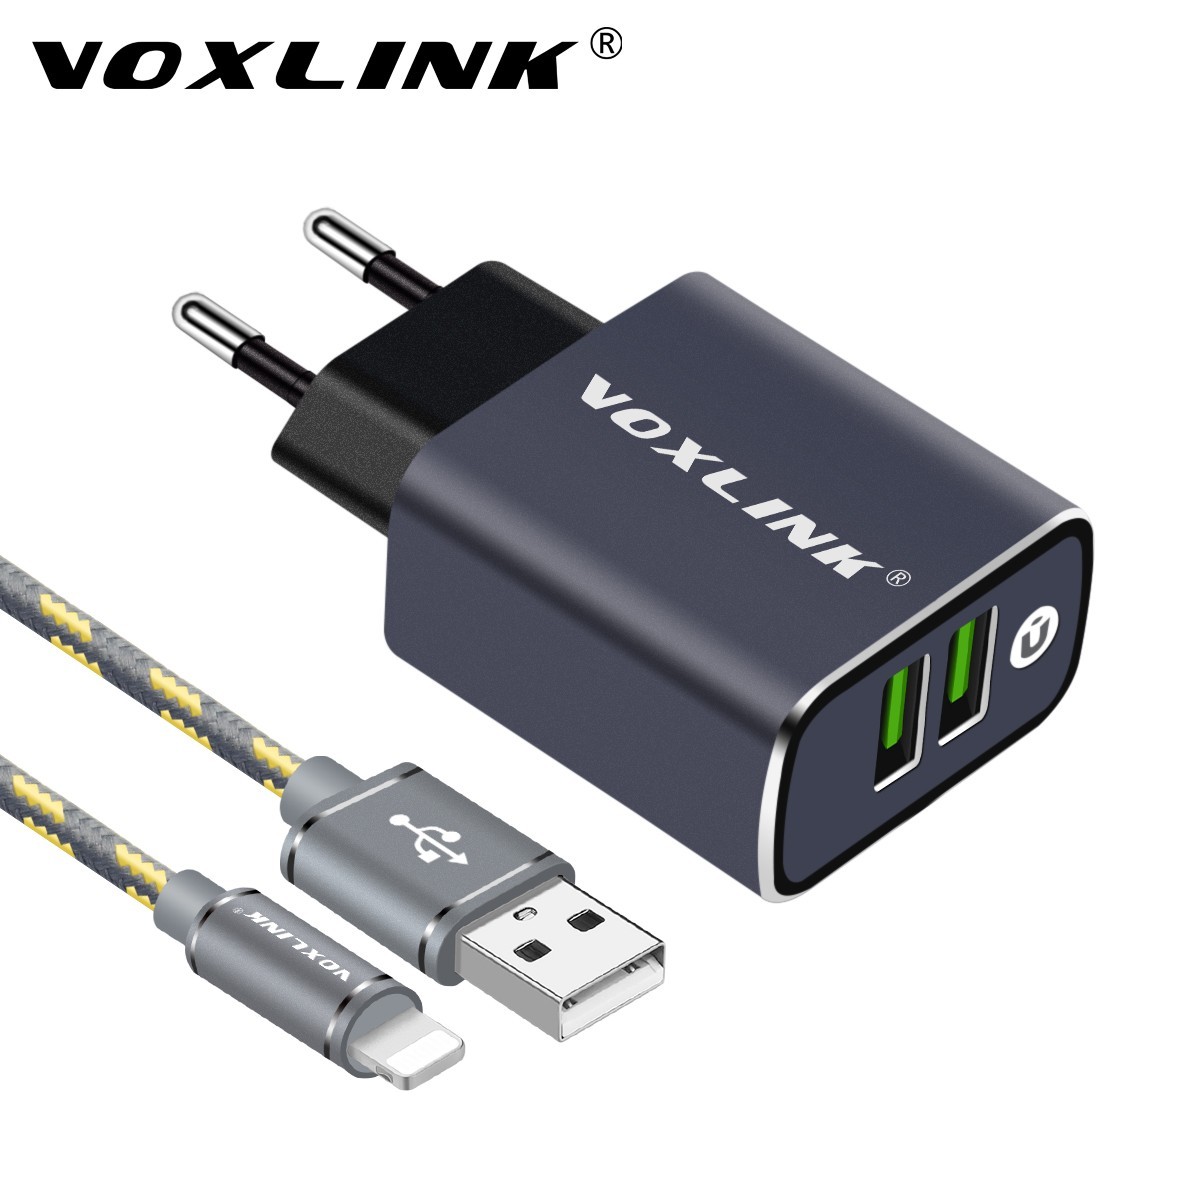 VOXLINK USB Charger,2 in 1 Dual Port 3.1A Universal USB Travel Charger + 3ft/1m USB Cable for iPhone 6/6s iPad Gray black